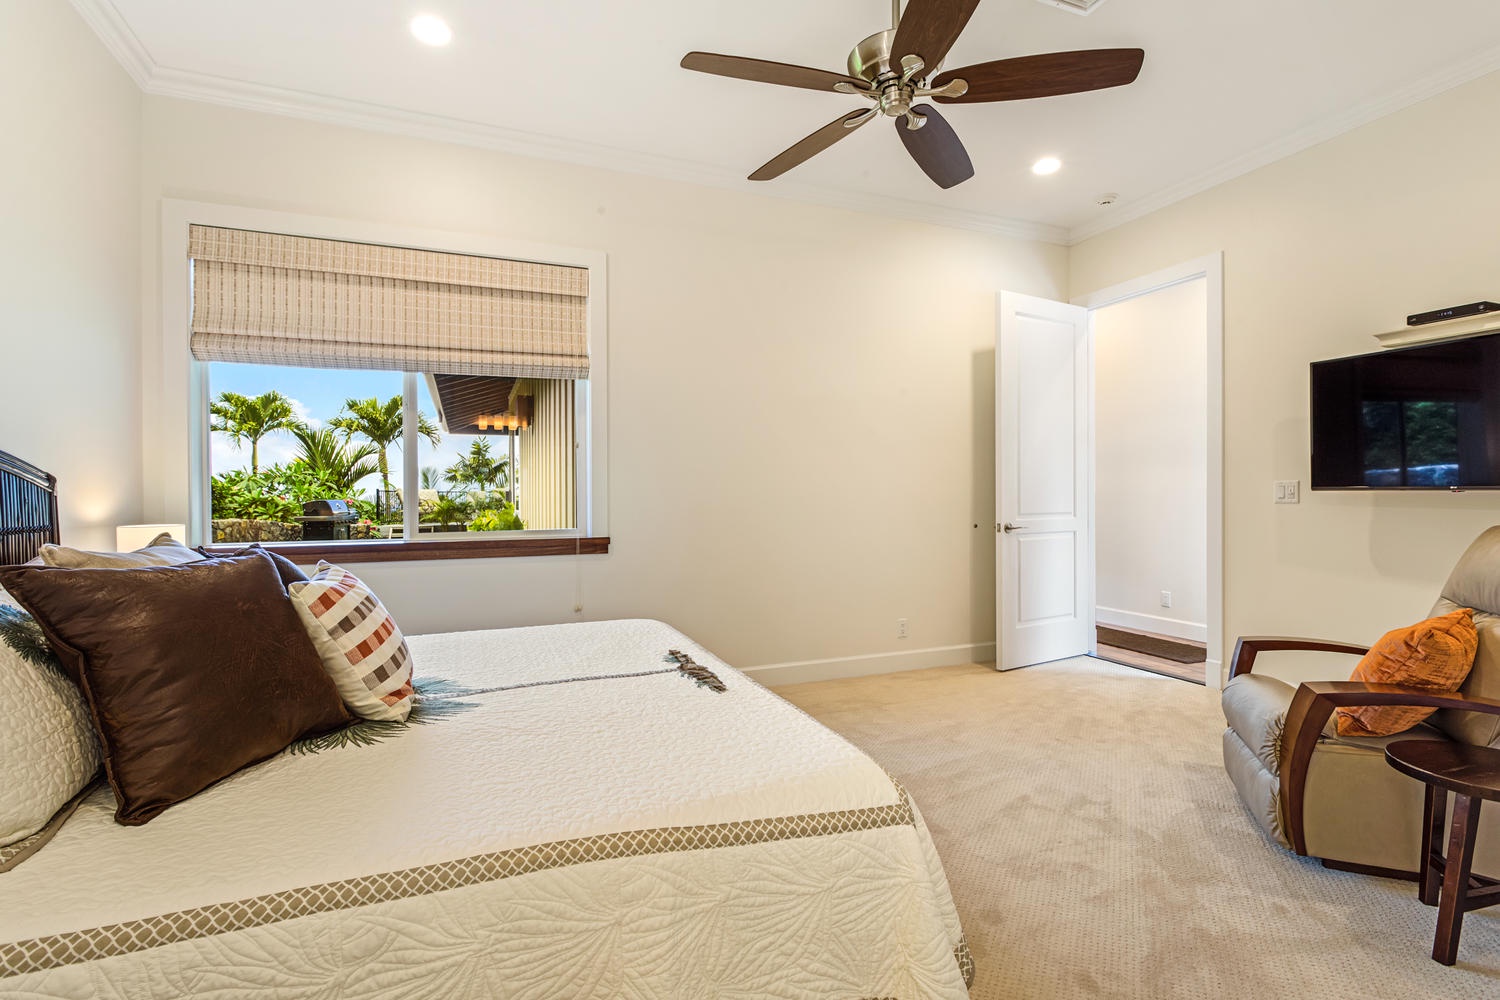 Kailua Kona Vacation Rentals, Ohana le'ale'a - Second primary bedroom with king bed